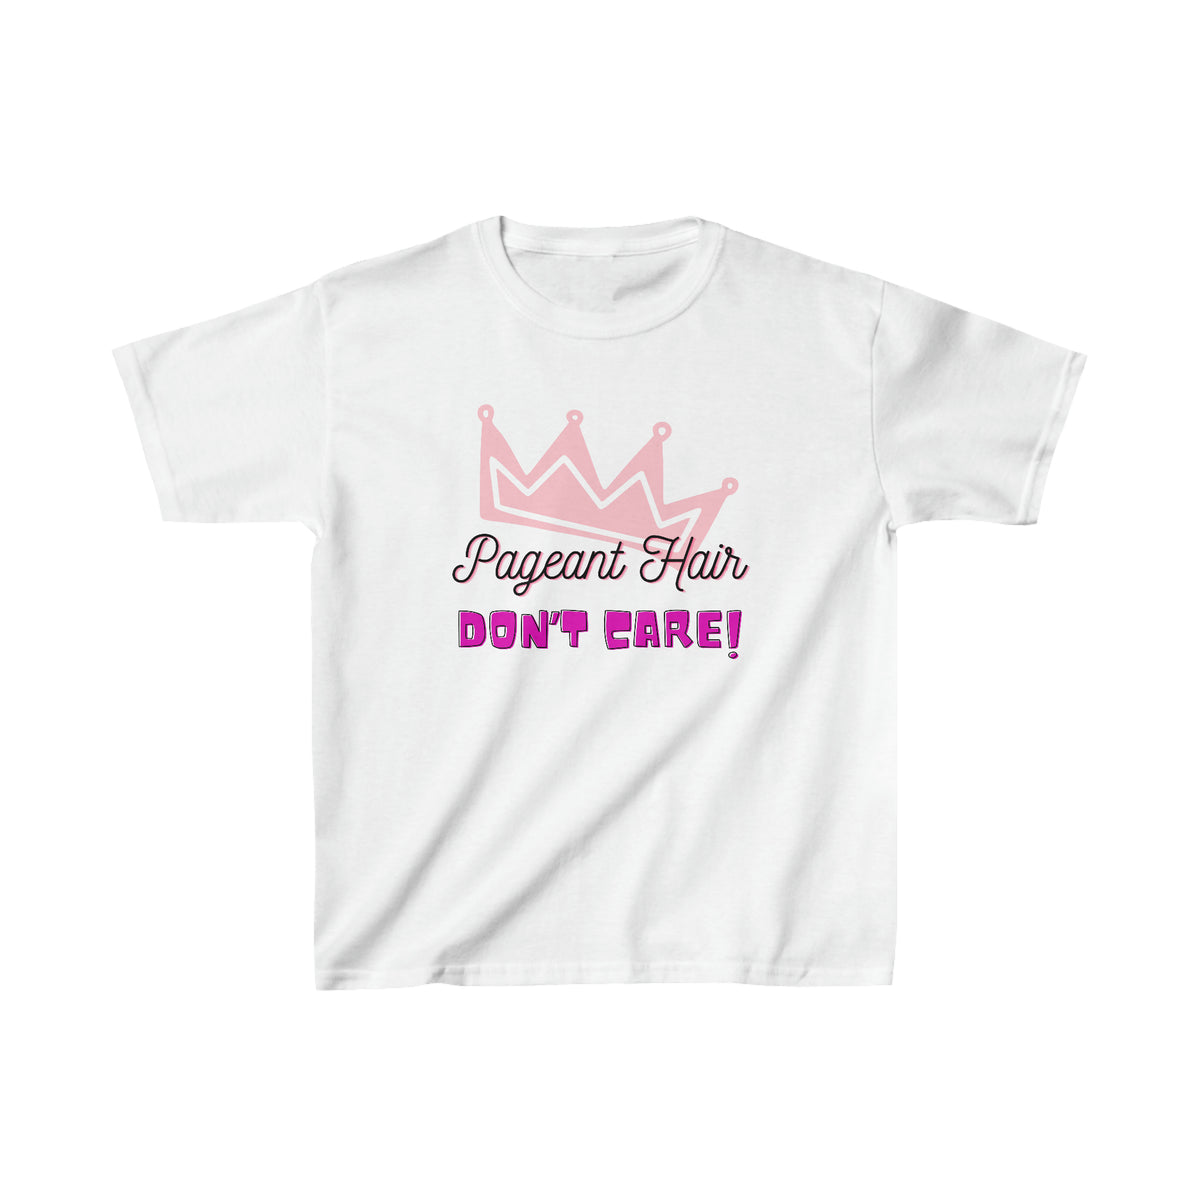 Pageant Hair, Don't Care - Kids Cotton Tee